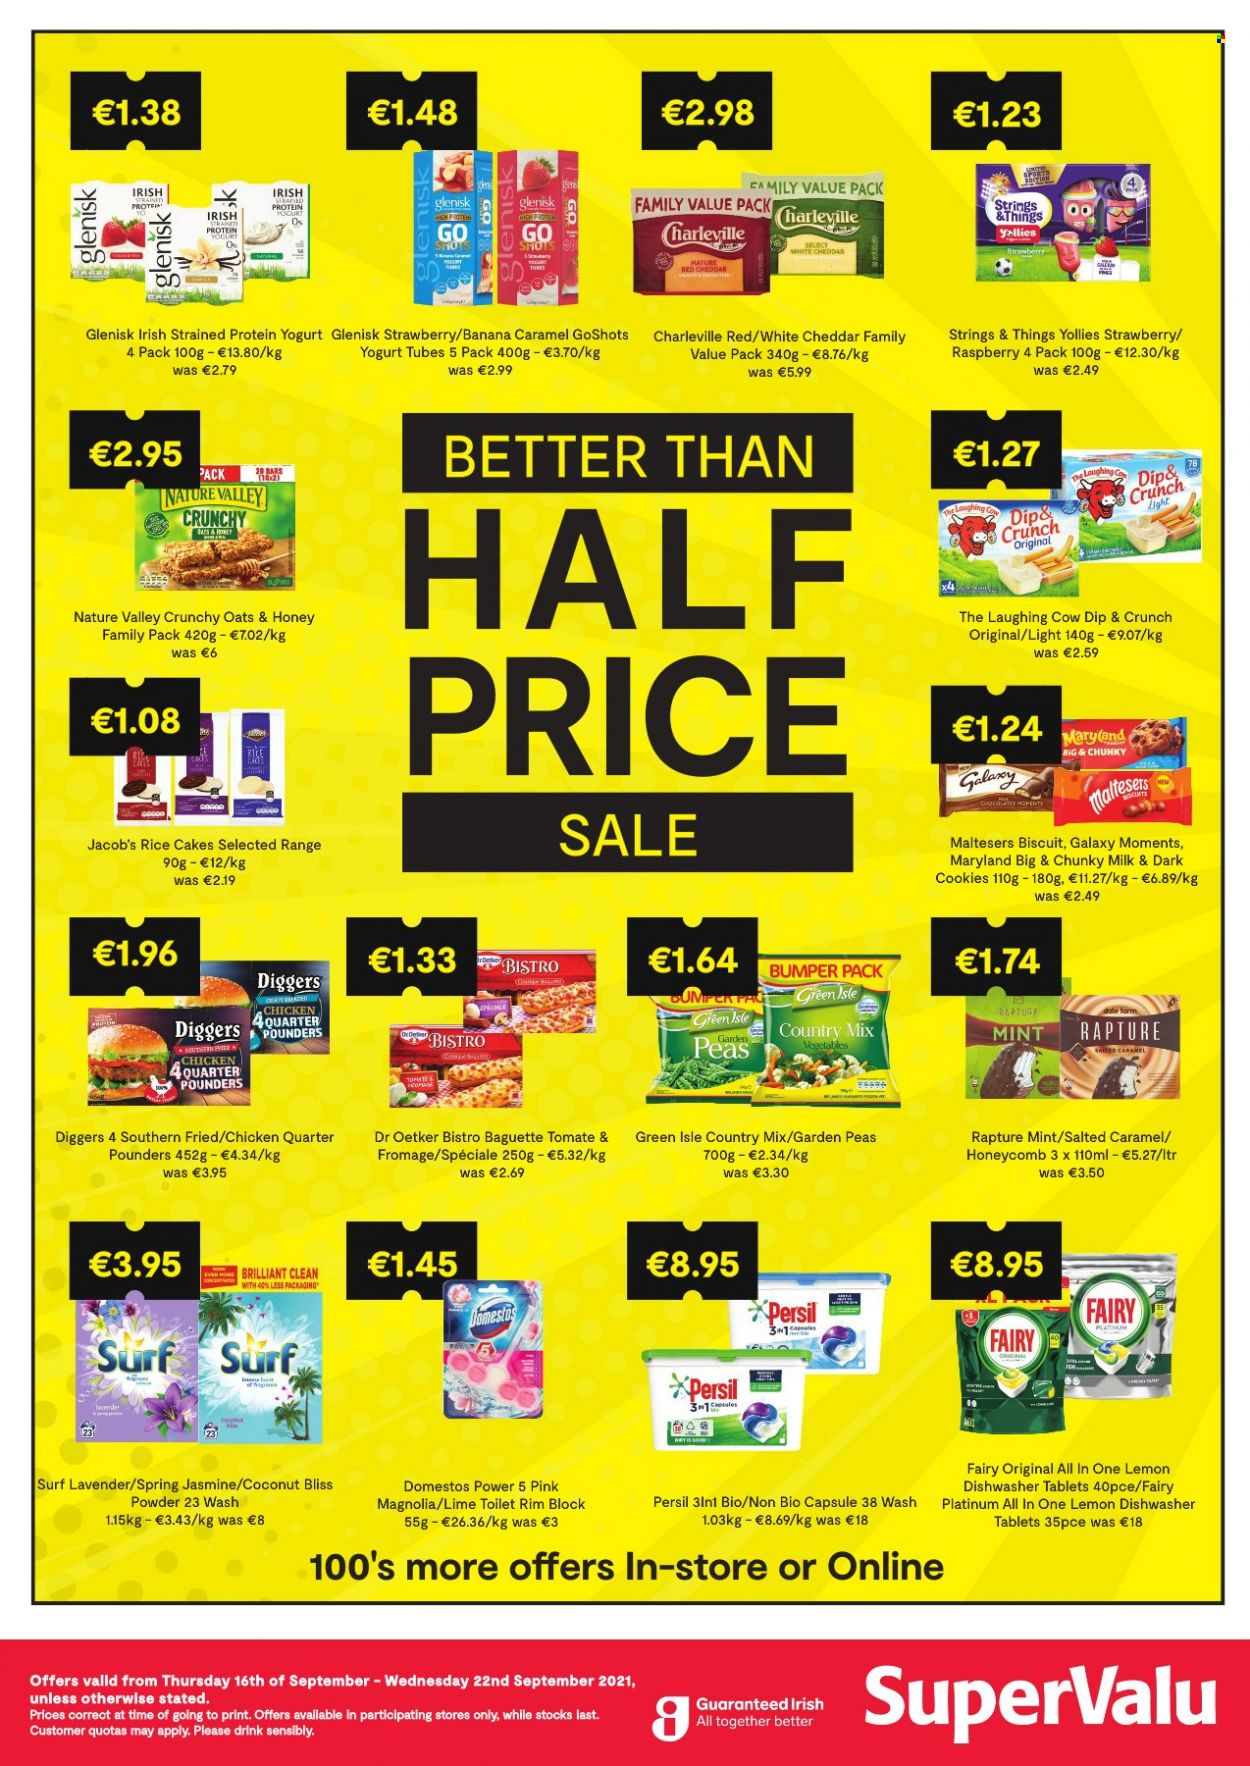 thumbnail - SuperValu offer  - 16.09.2021 - 22.09.2021 - Sales products - baguette, peas, cheese, The Laughing Cow, Dr. Oetker, yoghurt, milk, cookies, biscuit, Maltesers, Nature Valley, rice, honey, Domestos, Fairy, Persil, Surf, dishwasher cleaner, dishwasher tablets, Moments. Page 2.